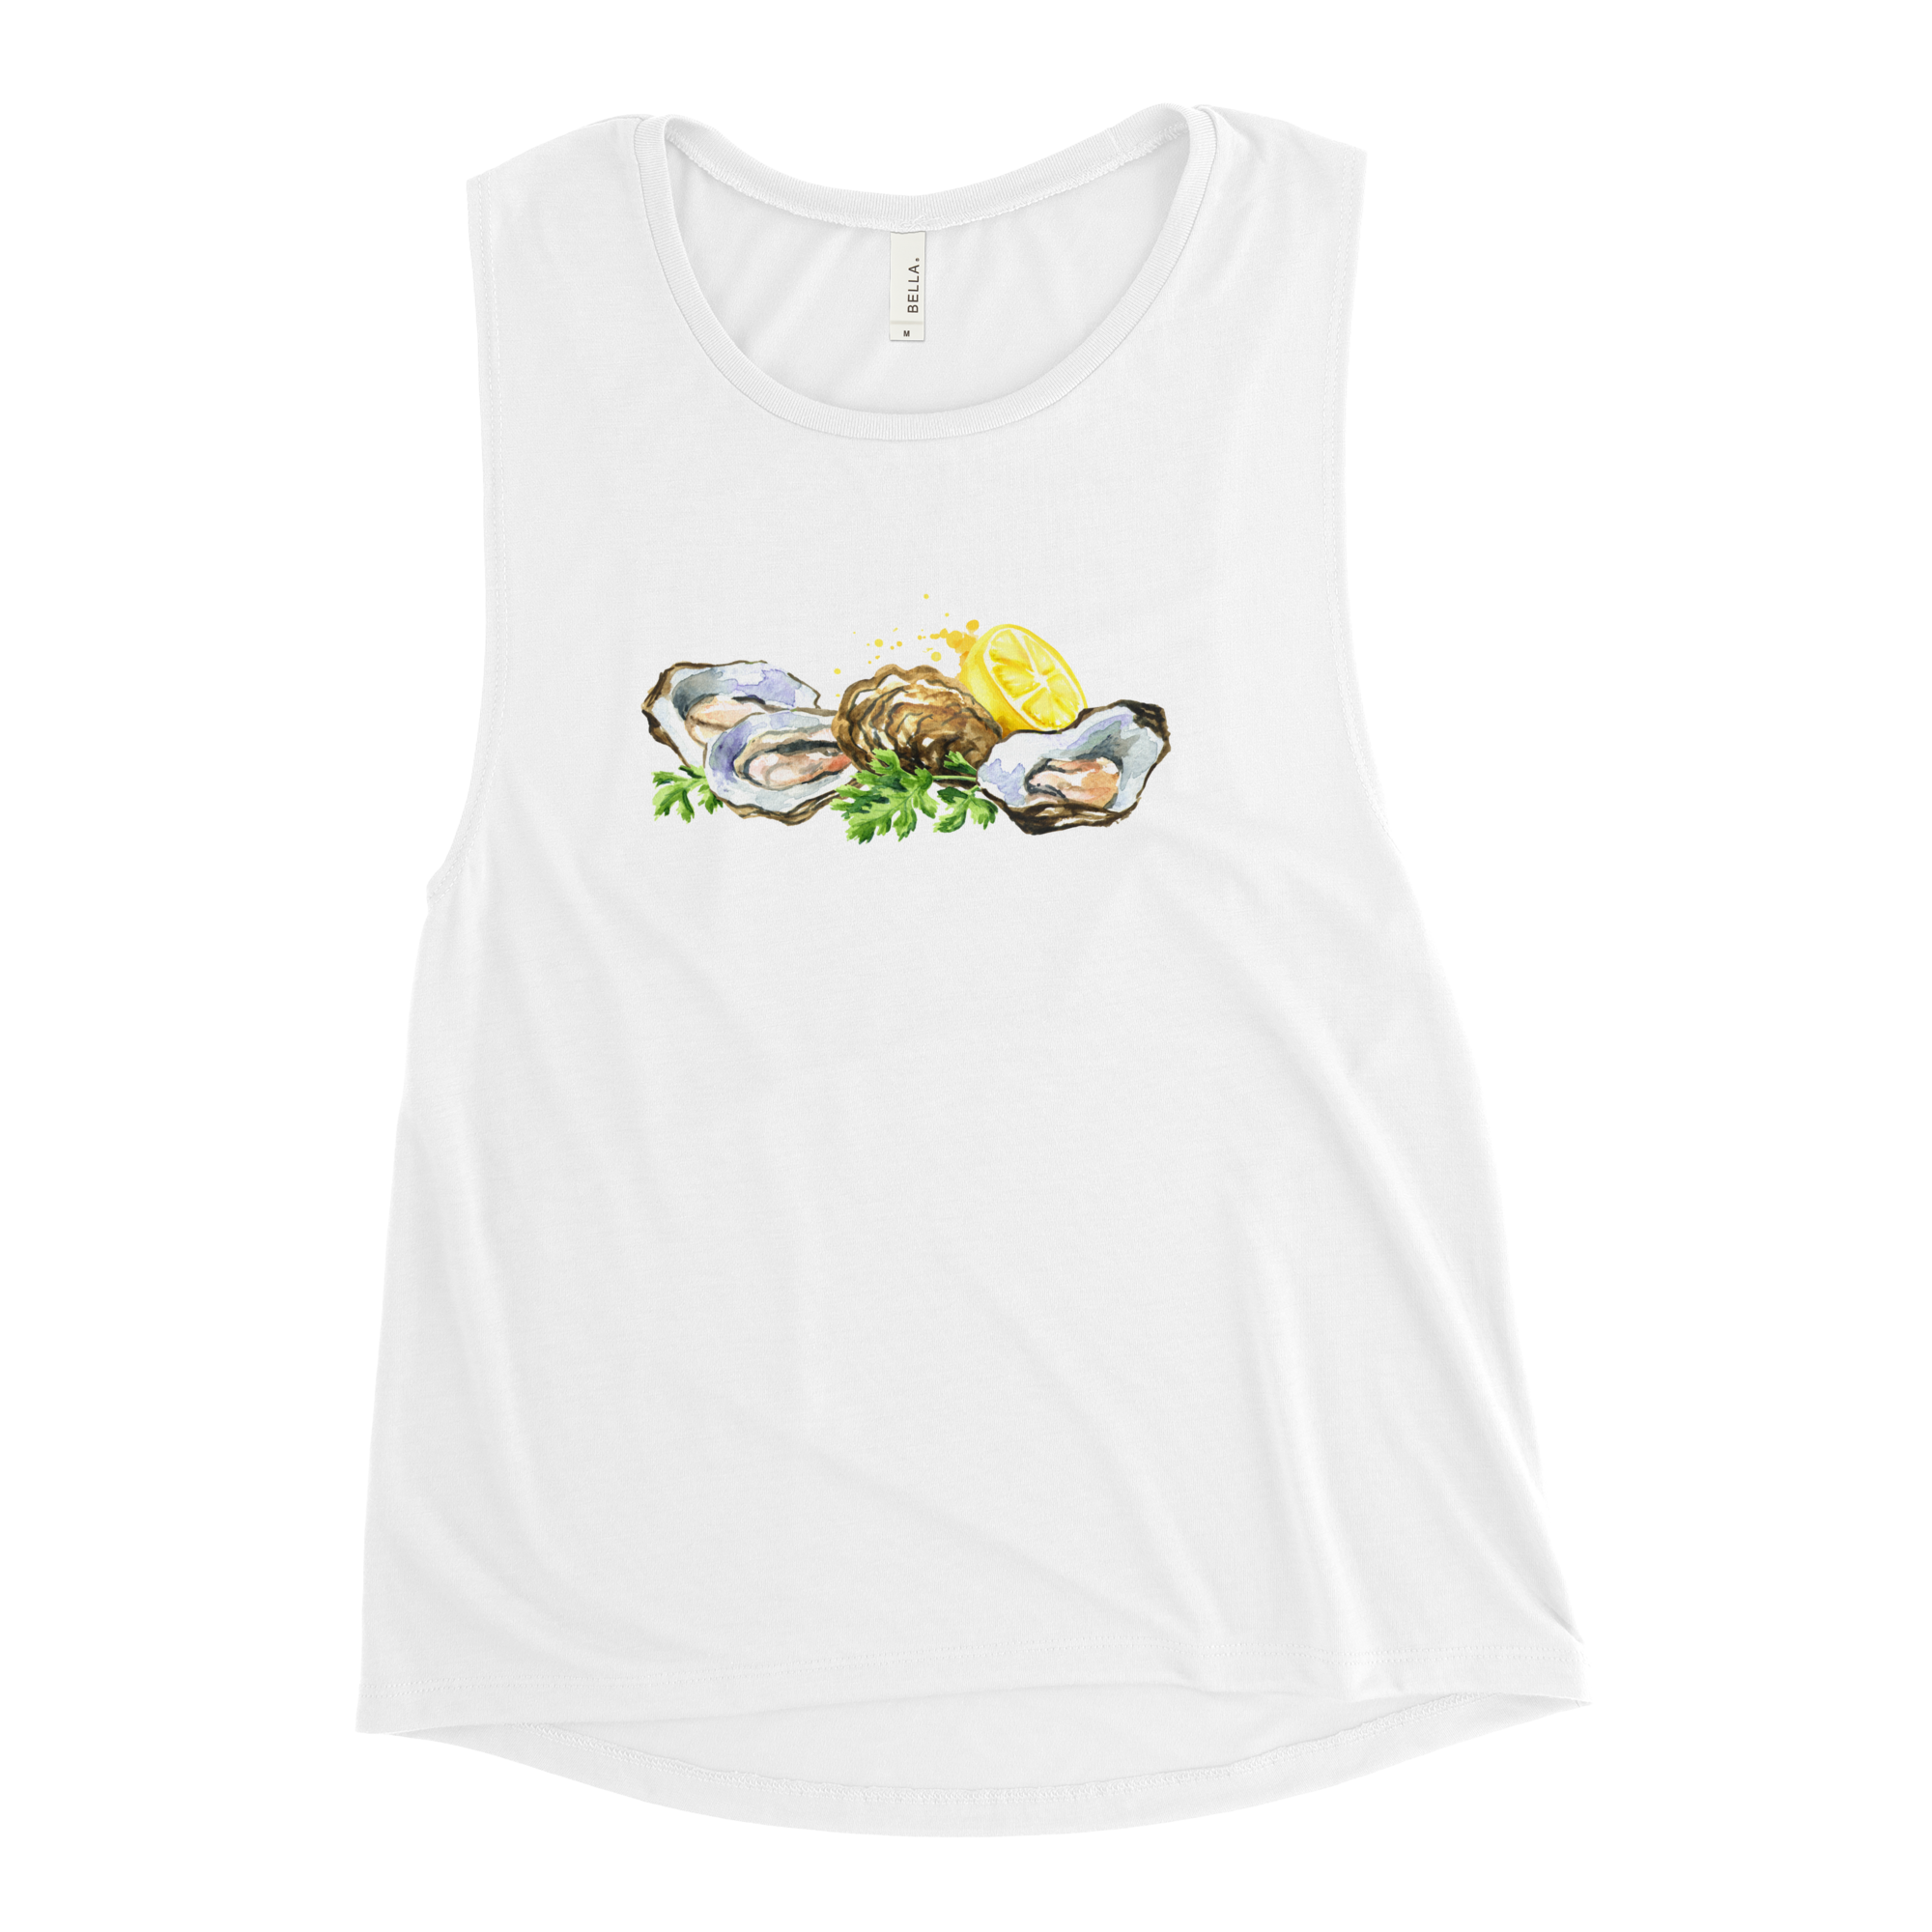 womens-muscle-tank-white-front-667b05c431a56.png